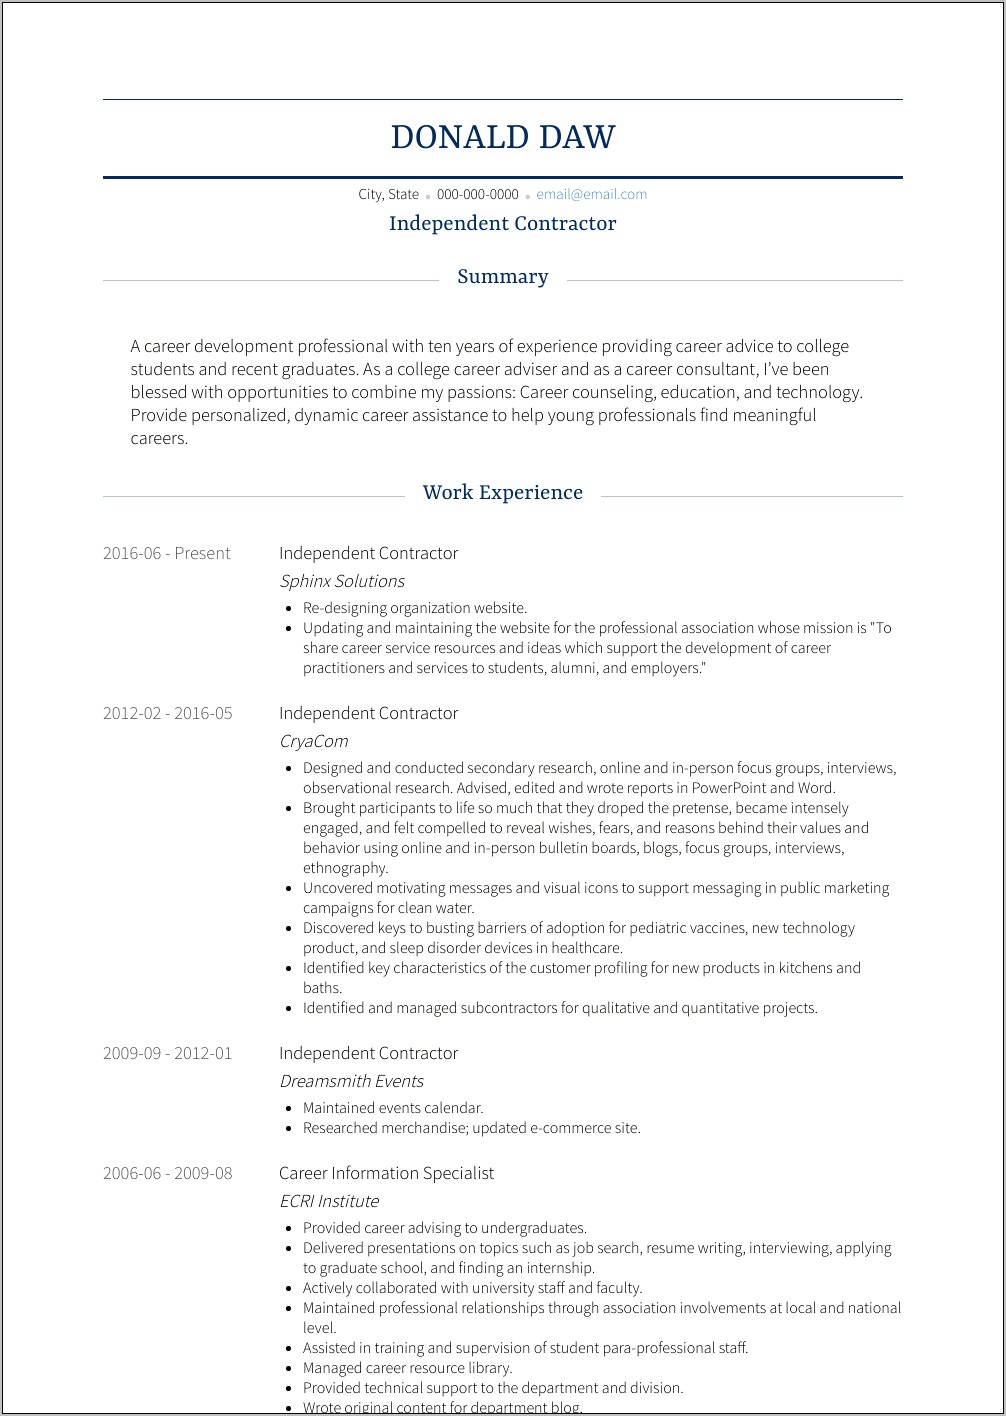 Resume Job Title For Self Employed It Consultant